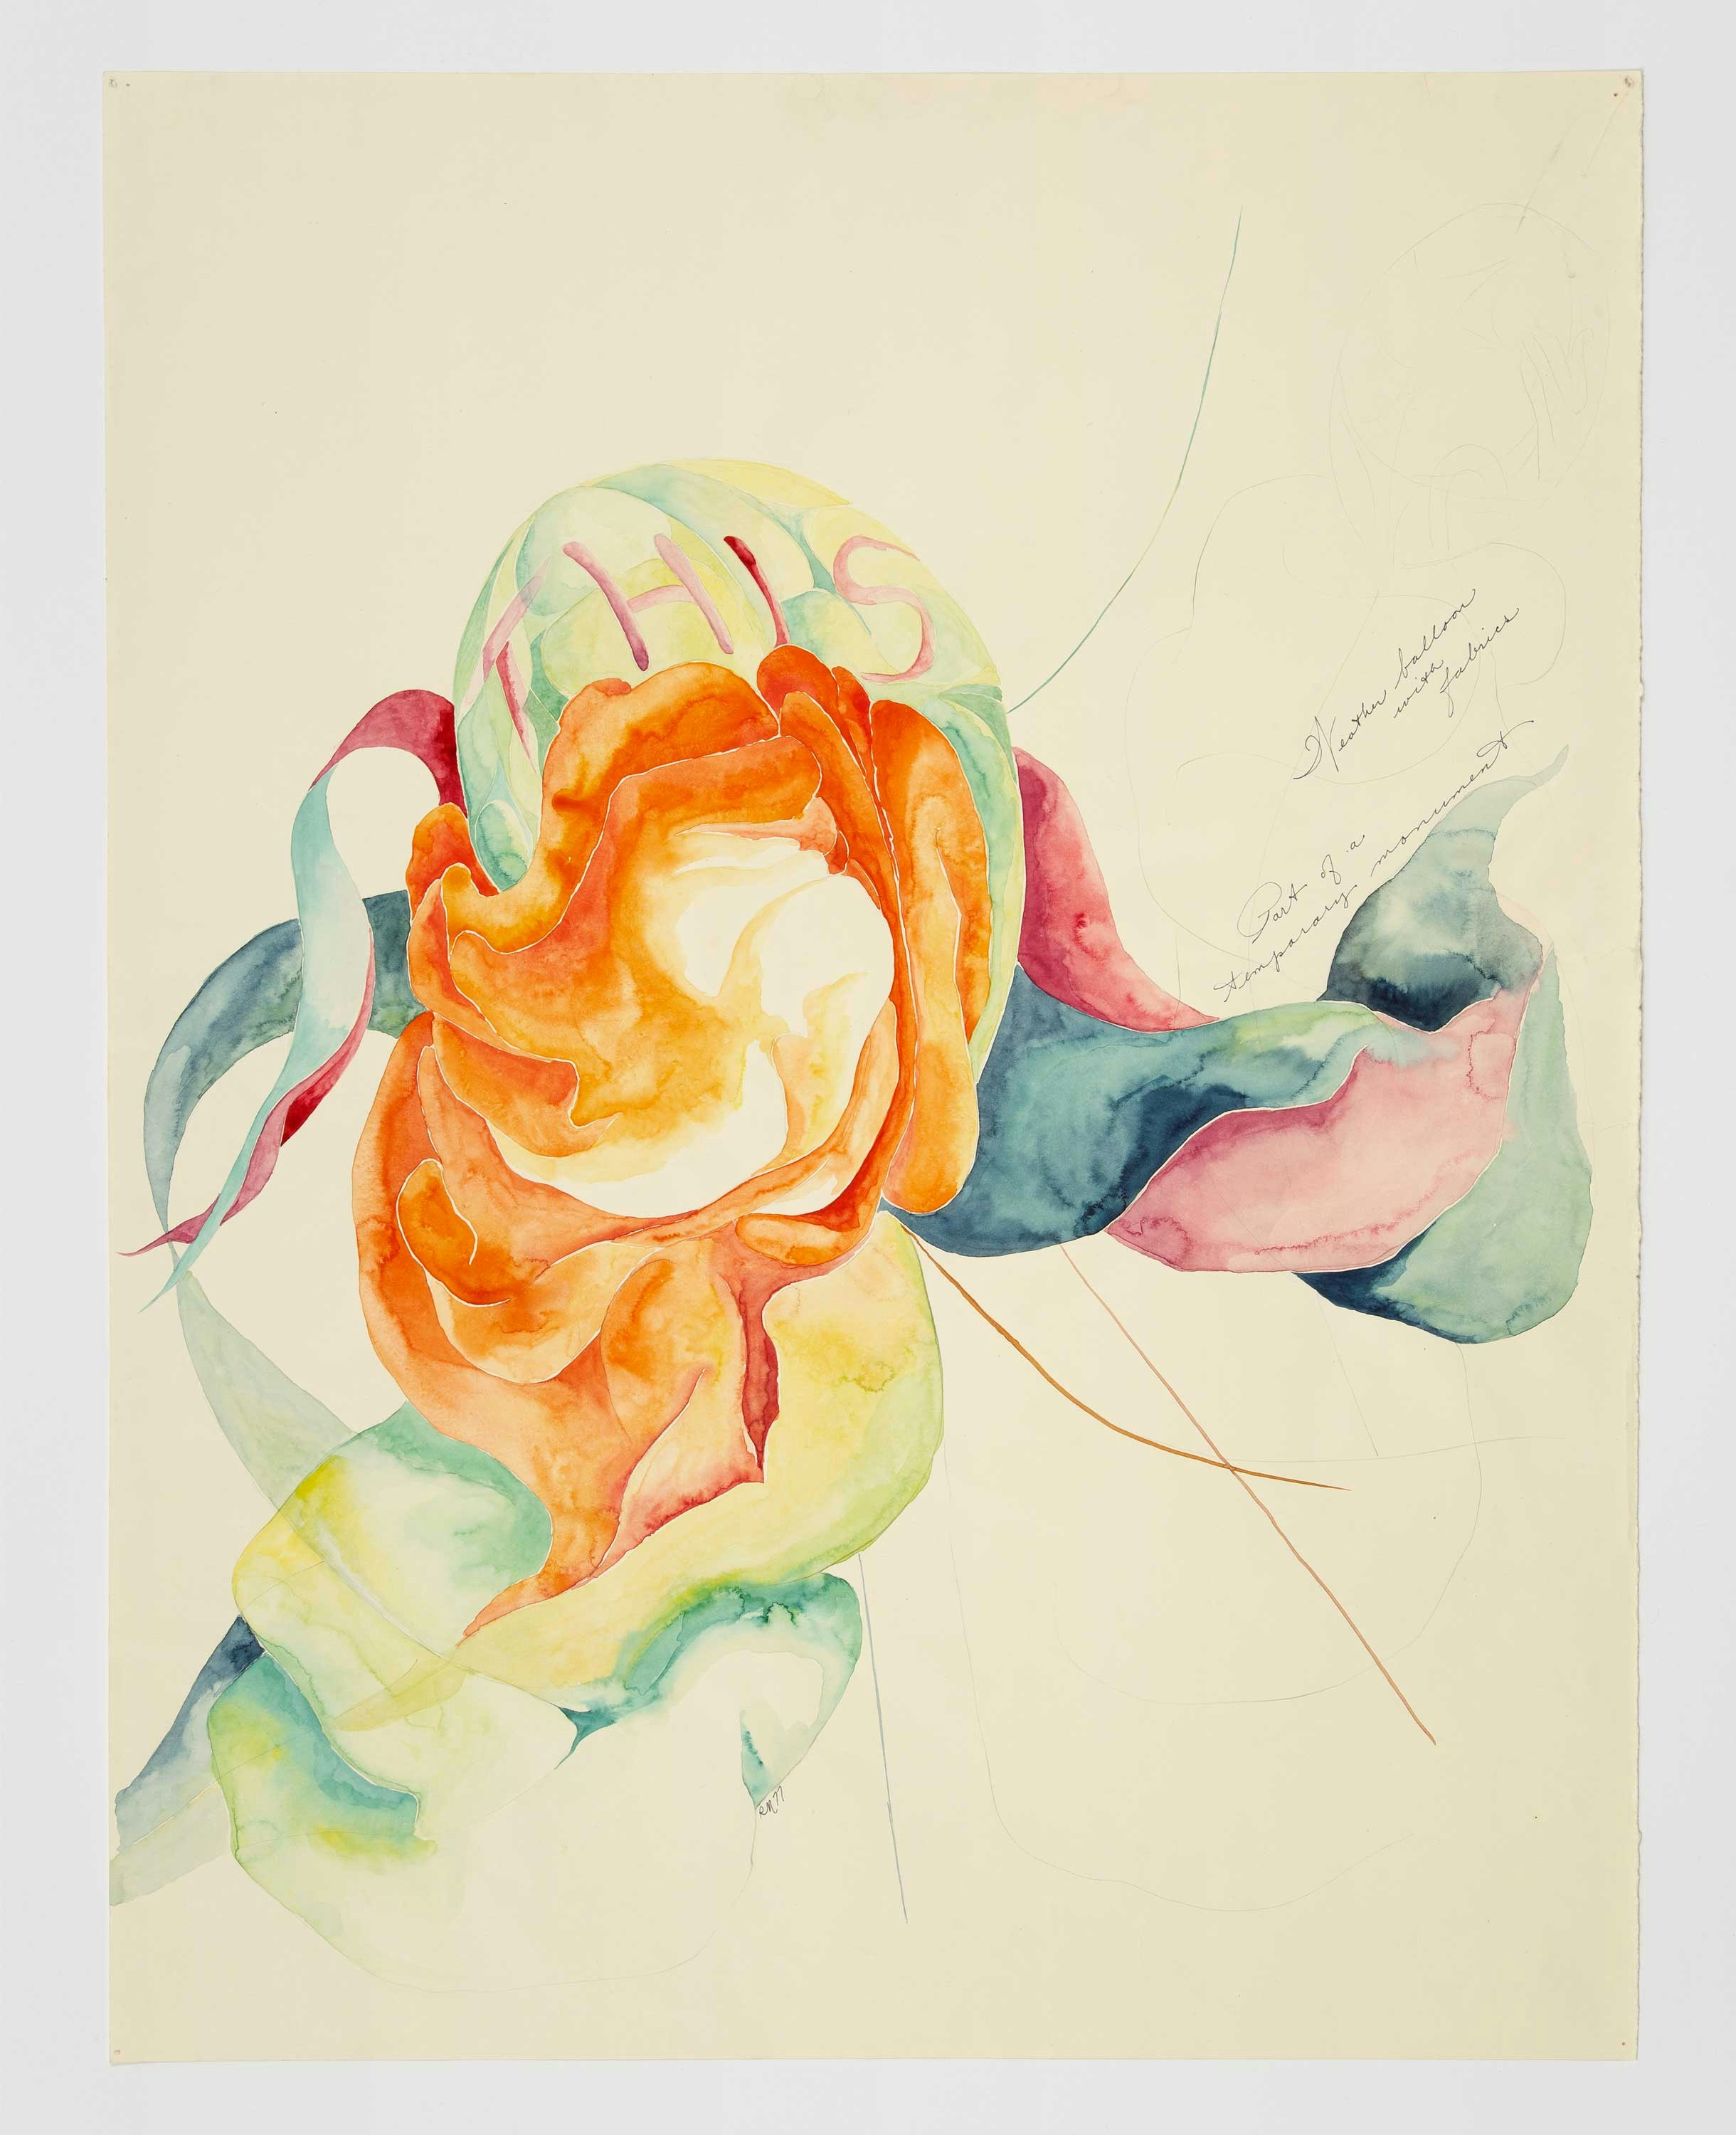 Rosemary Mayer, <em>Spell</em>, 1977. Watercolor, ink, and graphite on paper, 26 x 20 inches. Courtesy Gordon Robichaux, NY. Photo: Greg Carideo.